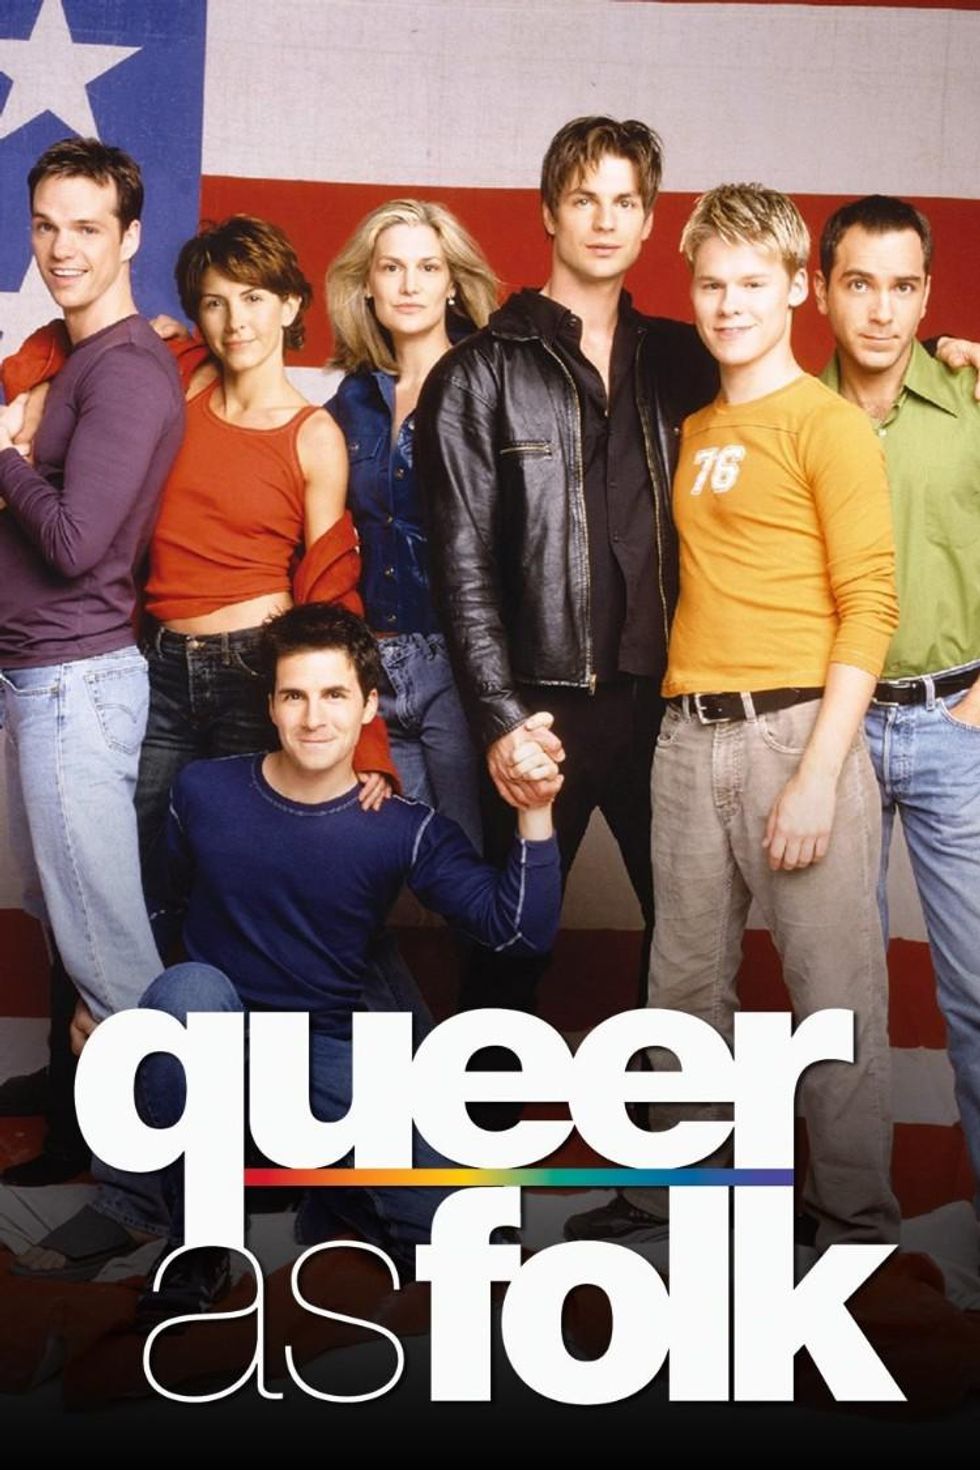 'Queer as Folk' Is Getting a Reboot, but Is It Ready for 2019?